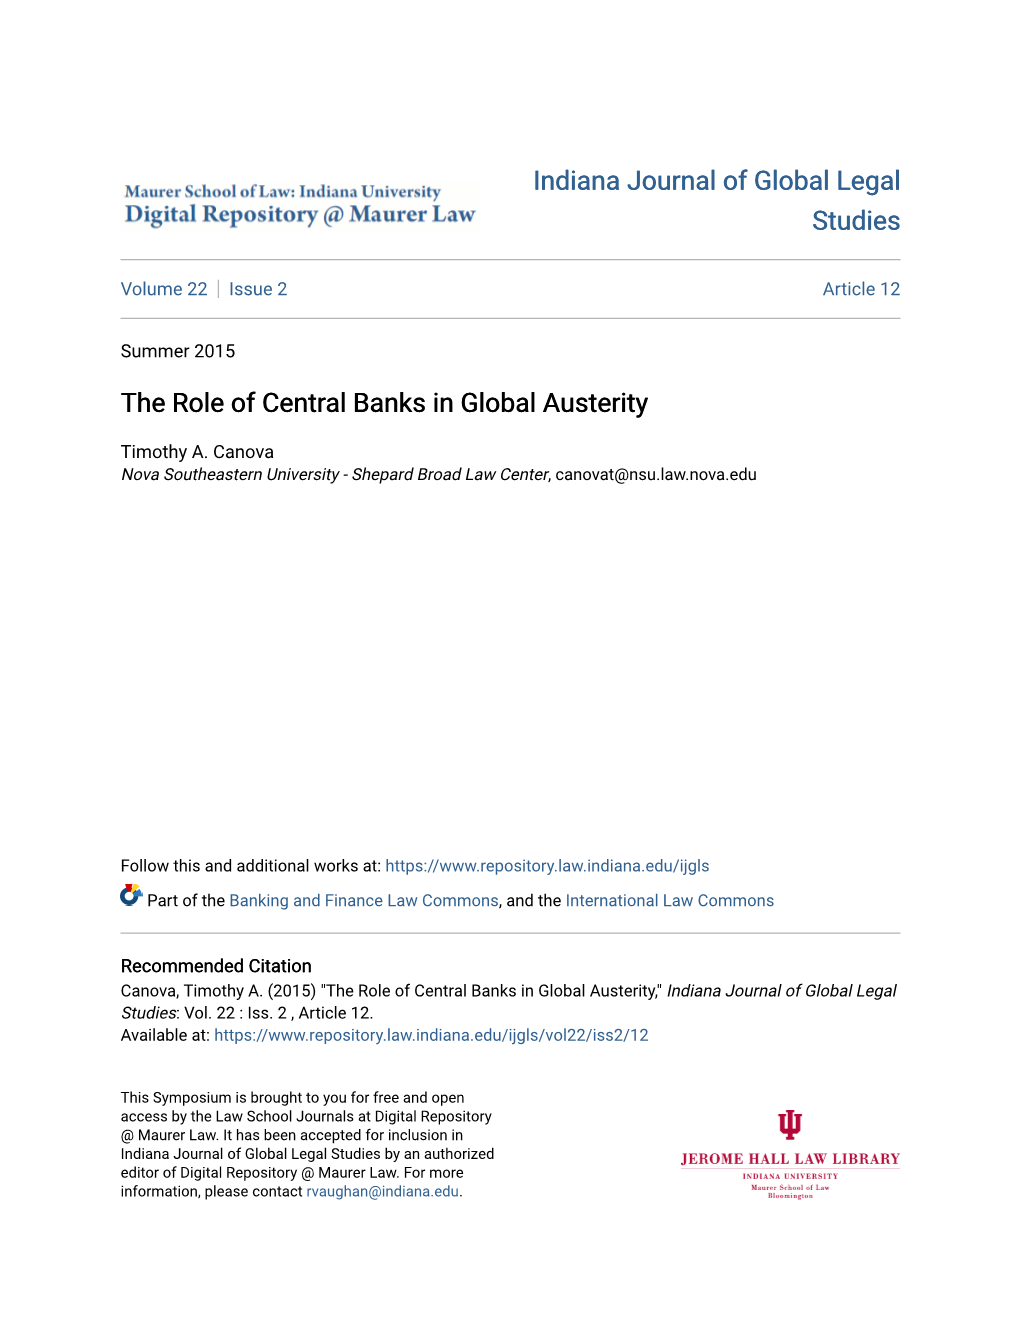 The Role of Central Banks in Global Austerity